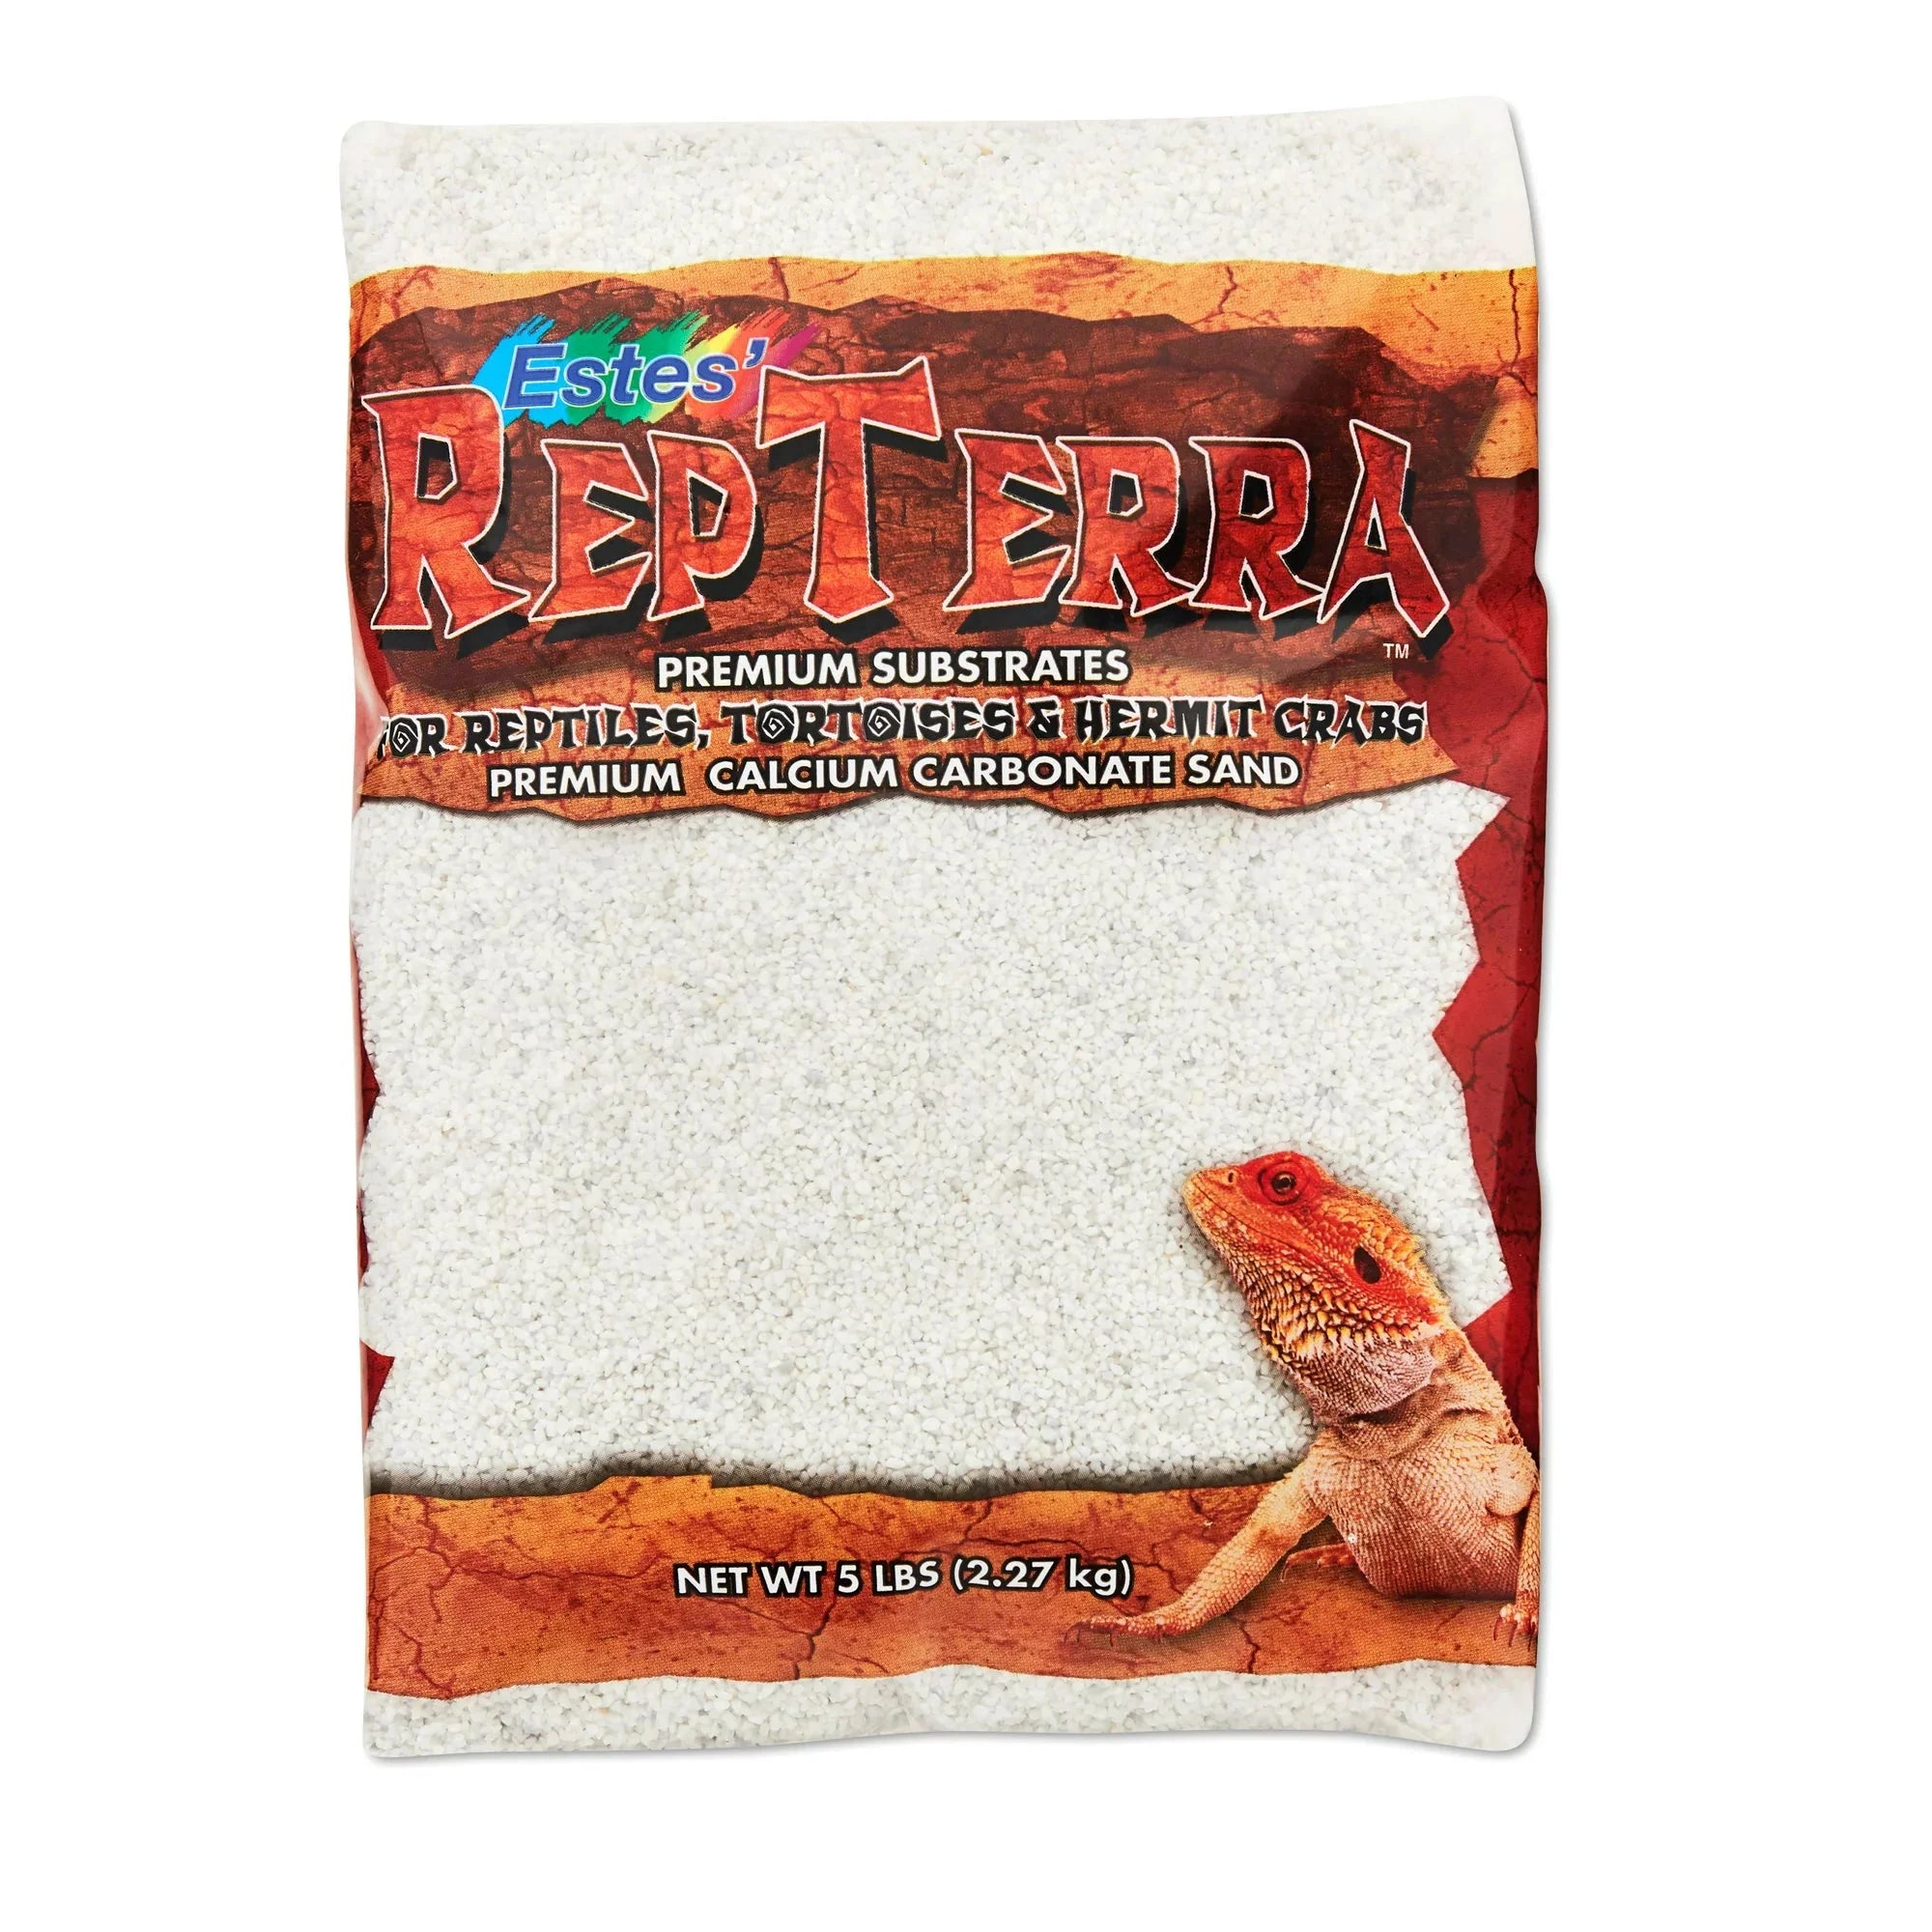 Wholesale prices with free shipping all over United States RepTerra White Reptile Sand 5 lb Bag - Steven Deals